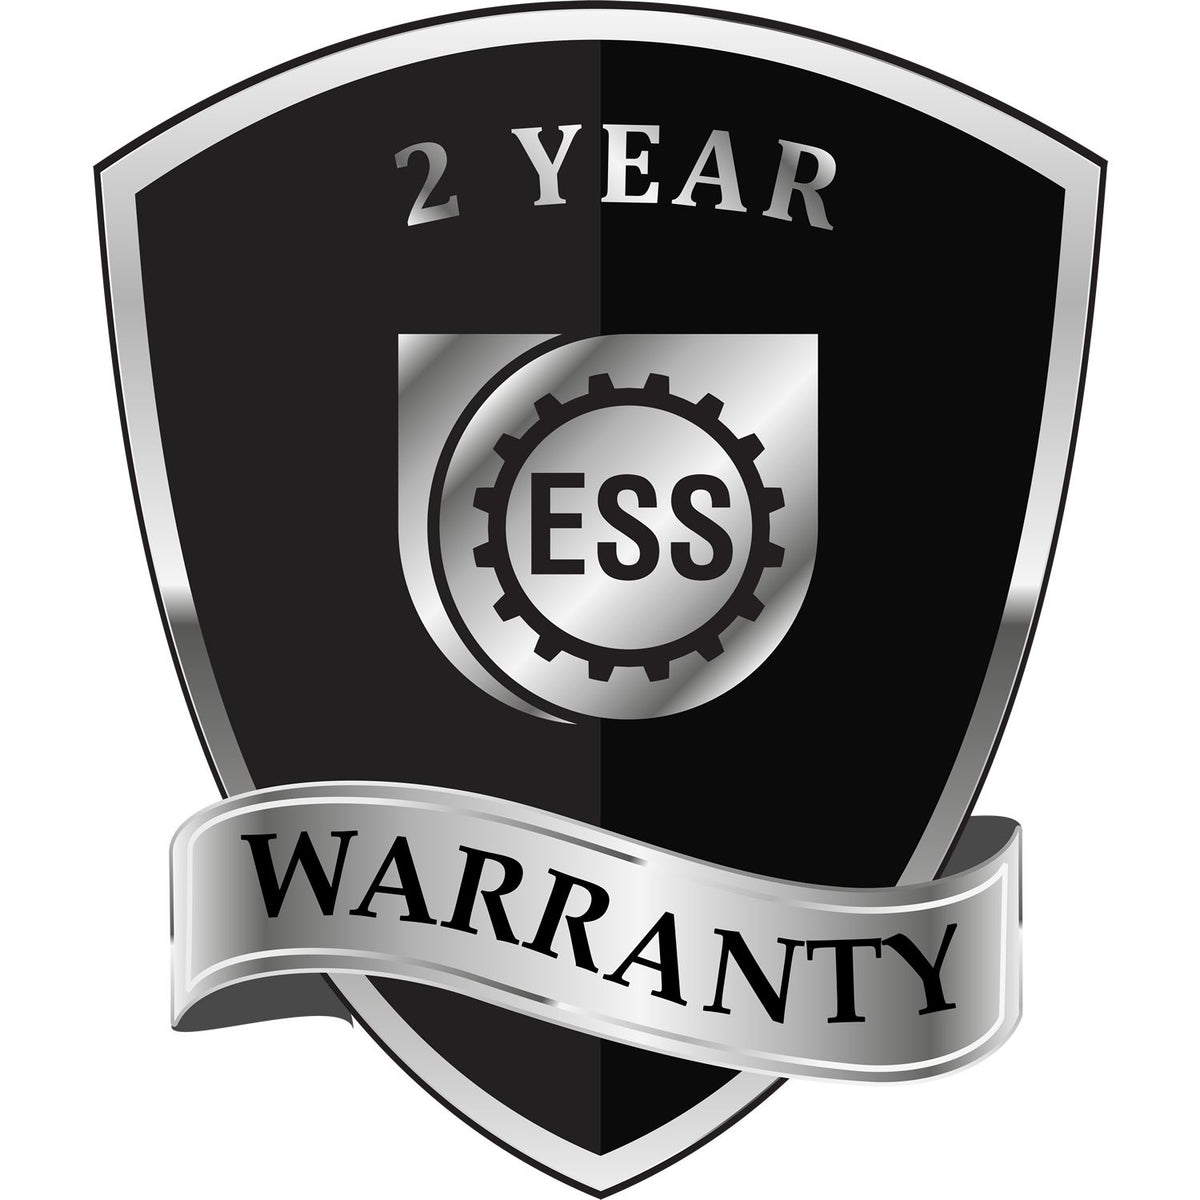 A black and silver badge or emblem showing warranty information for the Hybrid Maryland Architect Seal